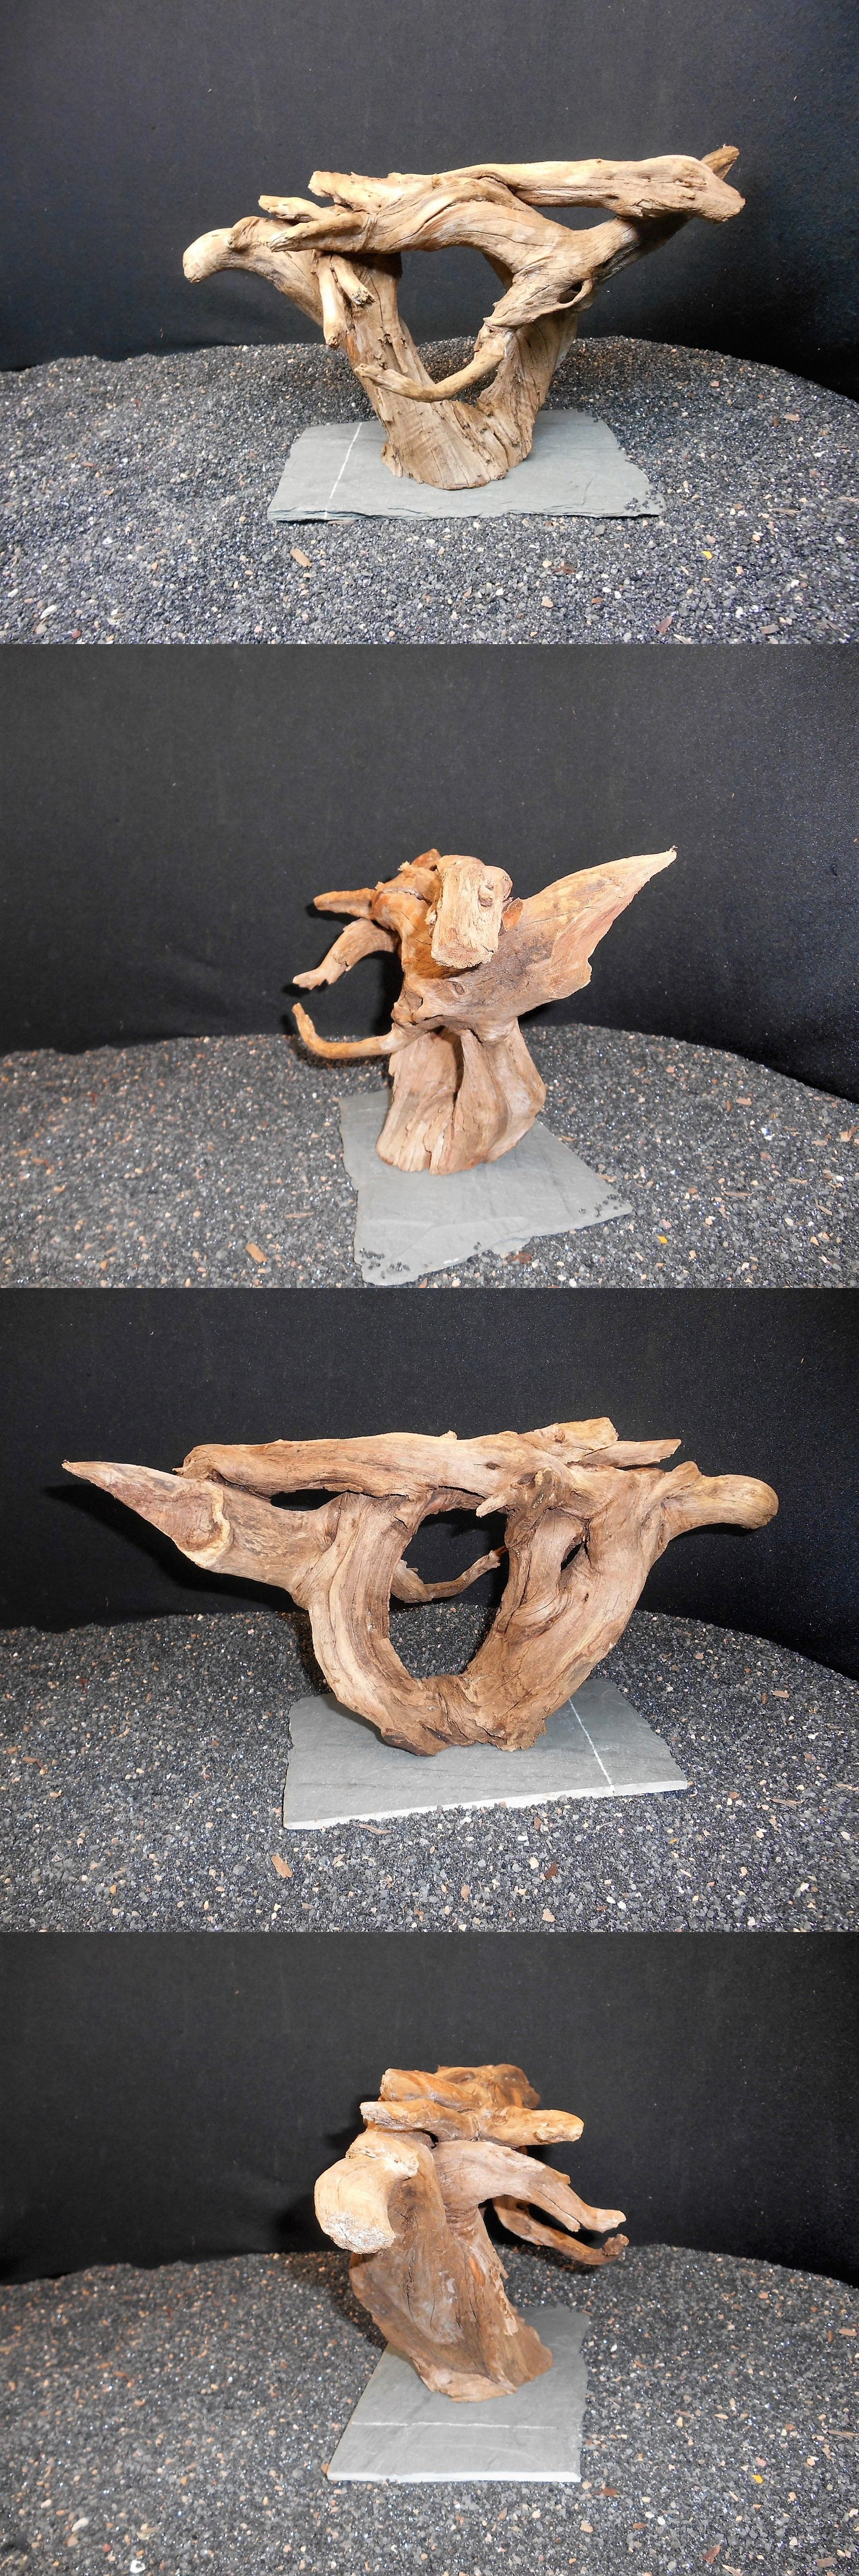 Decorations 66789: Mounted Driftwood For Fish Aquariums Reptile ...